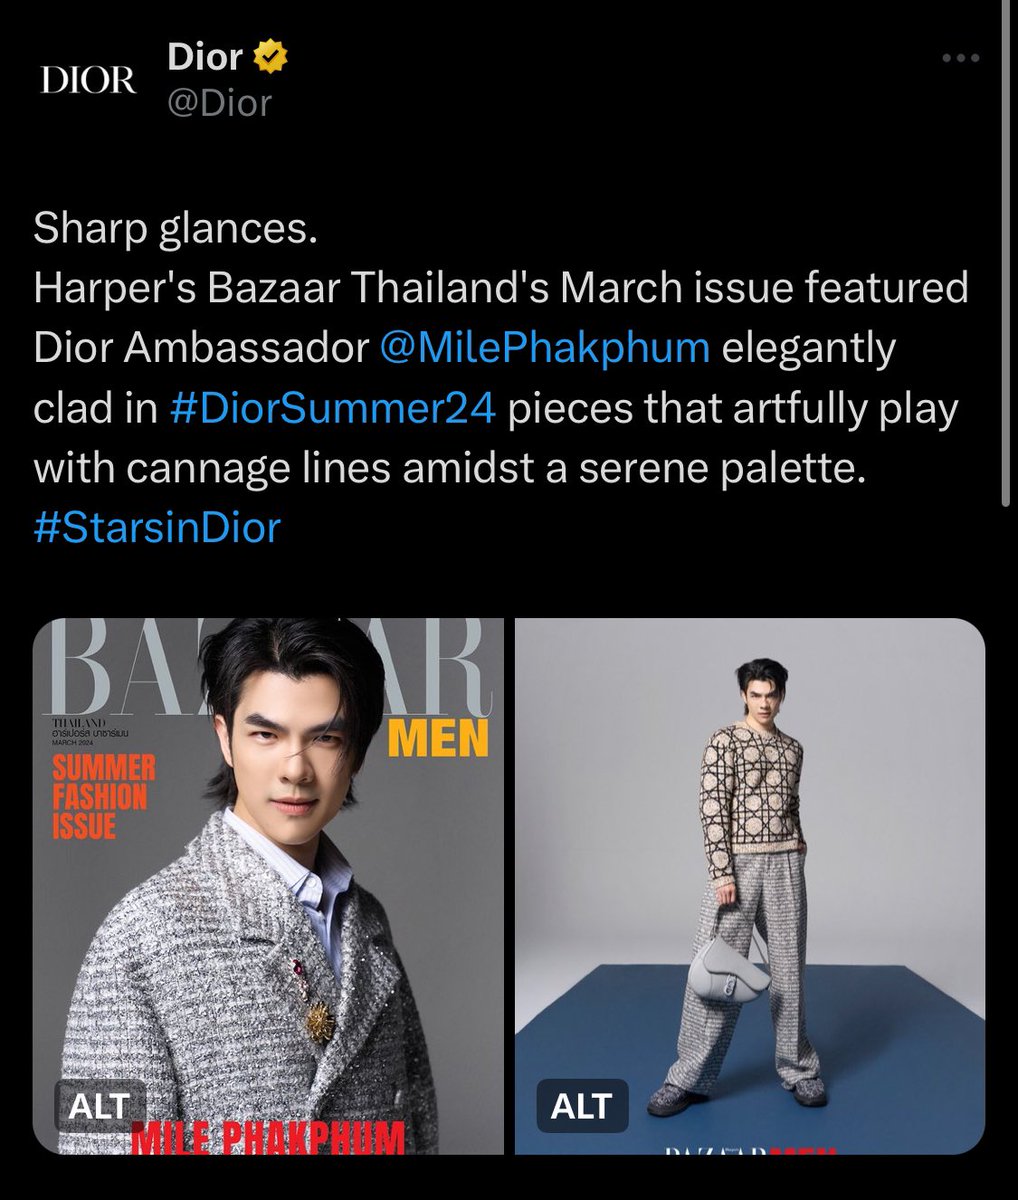 Added : Dior also post Mile in twitter & Apo in Instagram Dont forget to come & make engagement 💚💛 we so proud to see it @milephakphum @Nnattawin1 @Dior #dior #starindior #MilePhakphum #ApoNattawin